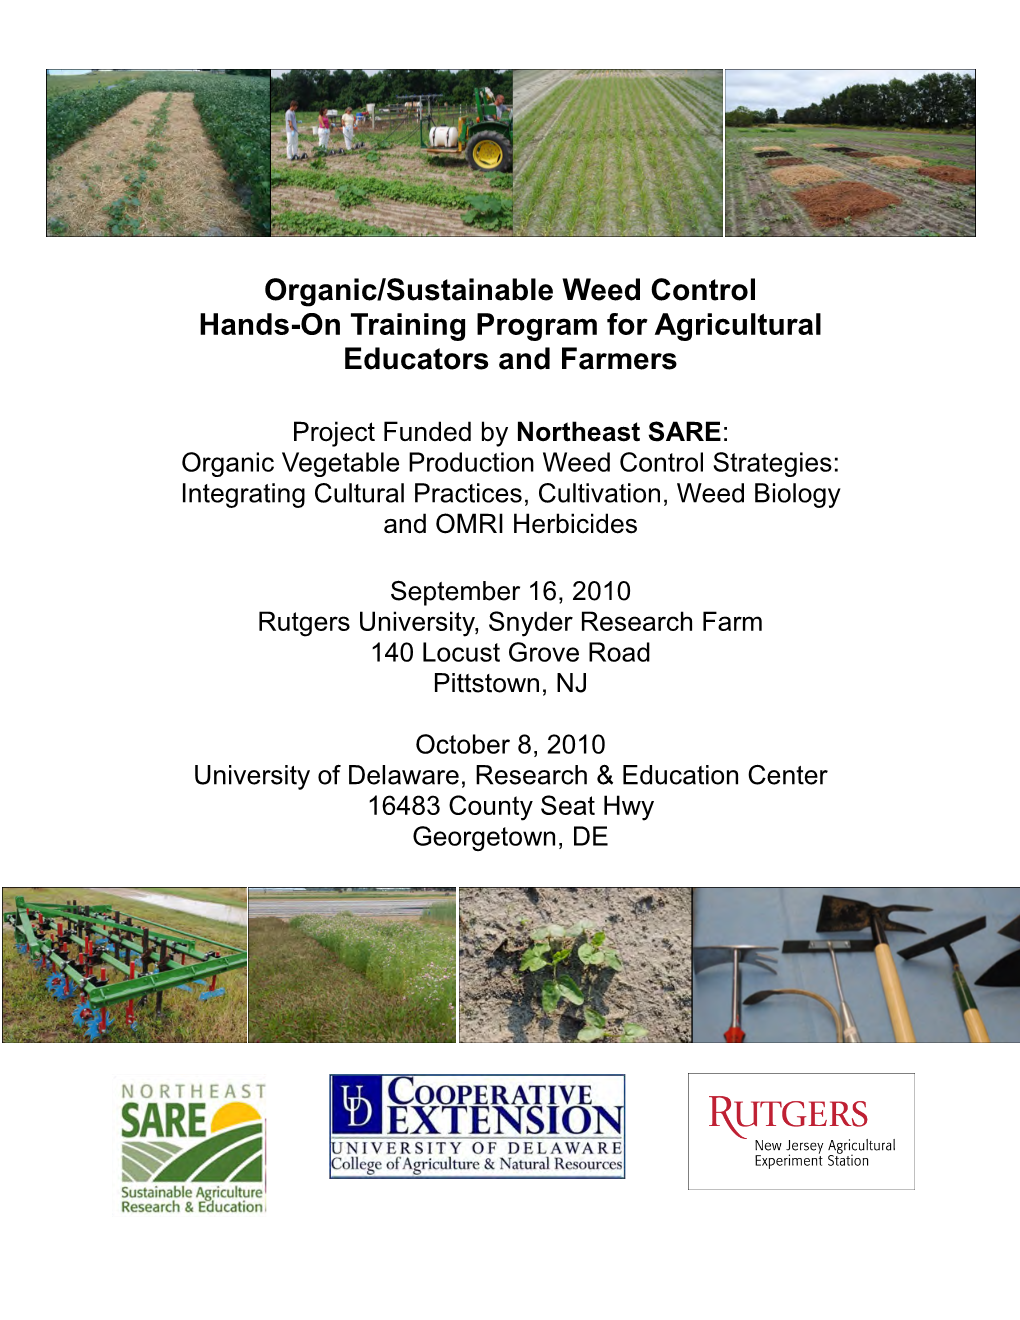 Organic/Sustainable Weed Control Hands-On Training Program for Agricultural Educators and Farmers